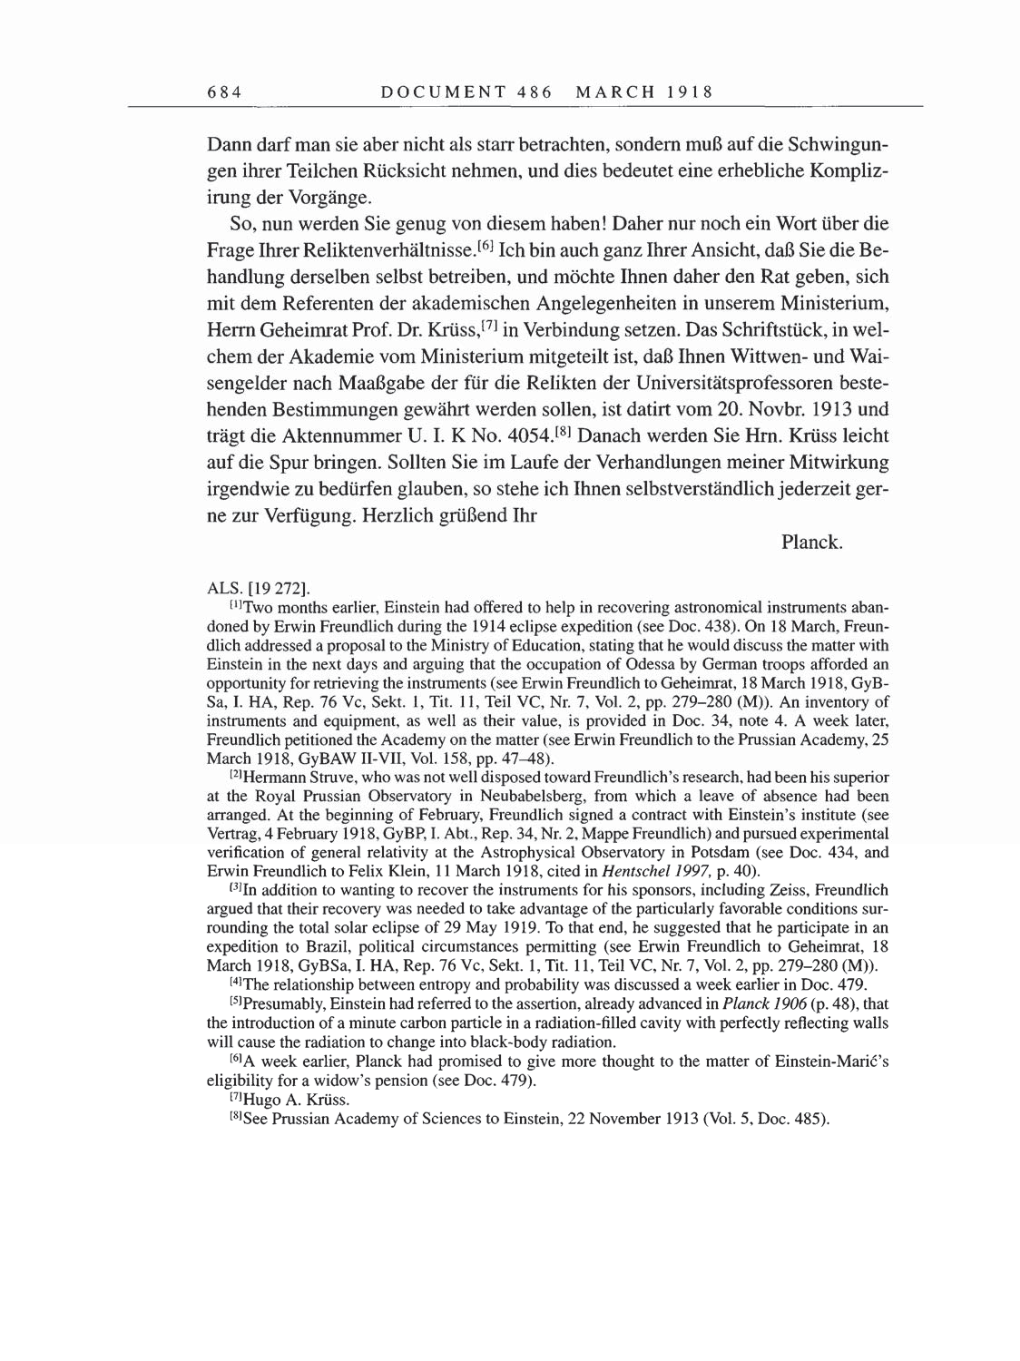 Volume 8, Part B: The Berlin Years: Correspondence 1918 page 684